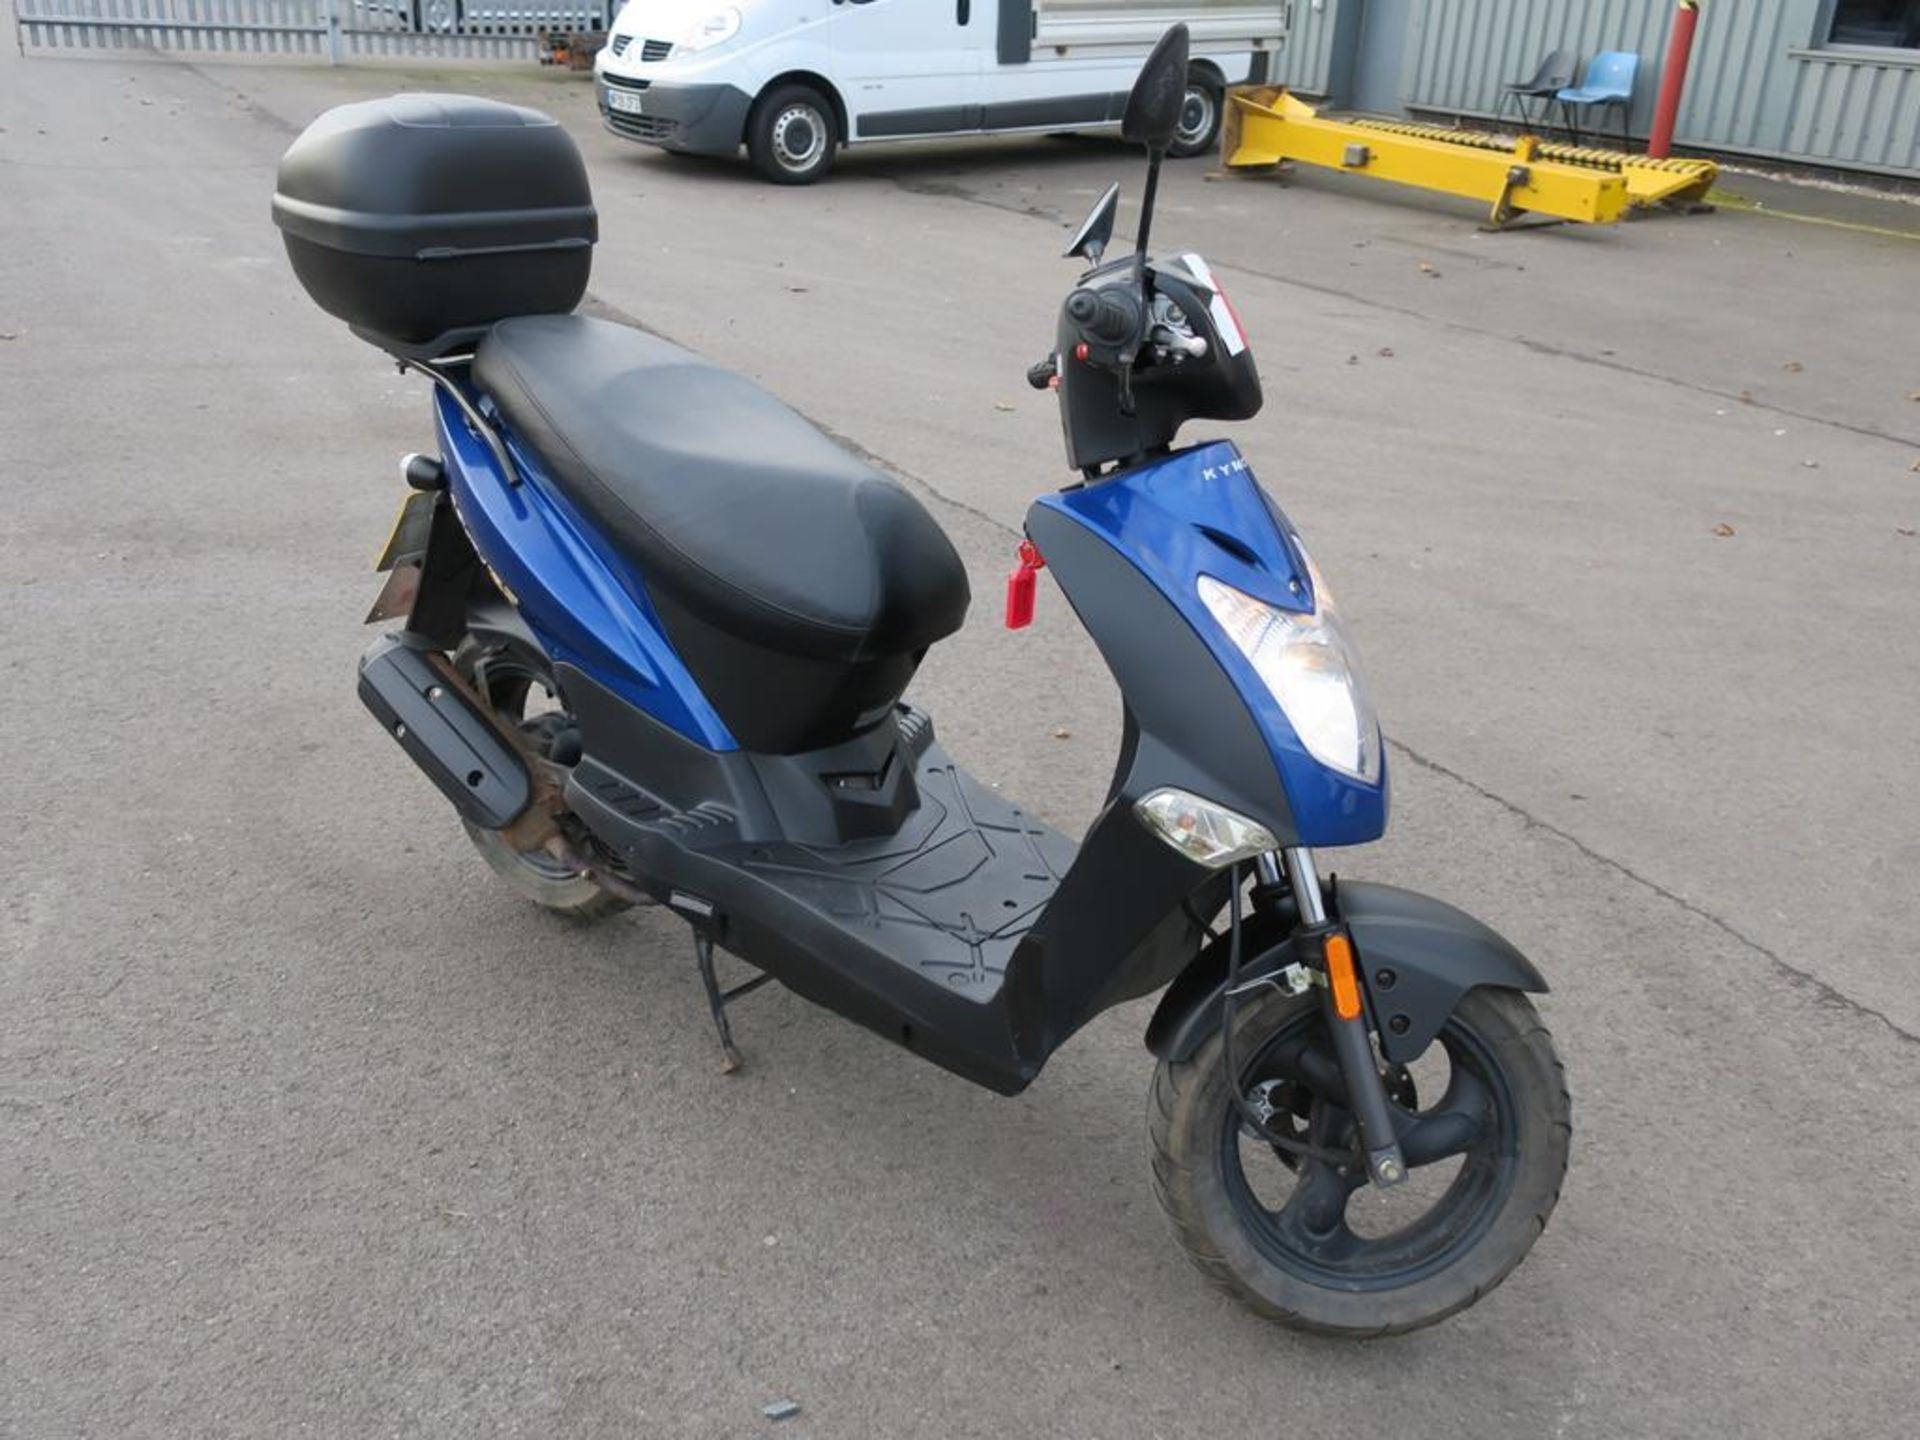 2016 Kymco Agility 125 Scooter Powered by a 125cc 4 Stroke Engine with automatic transmission, c/w